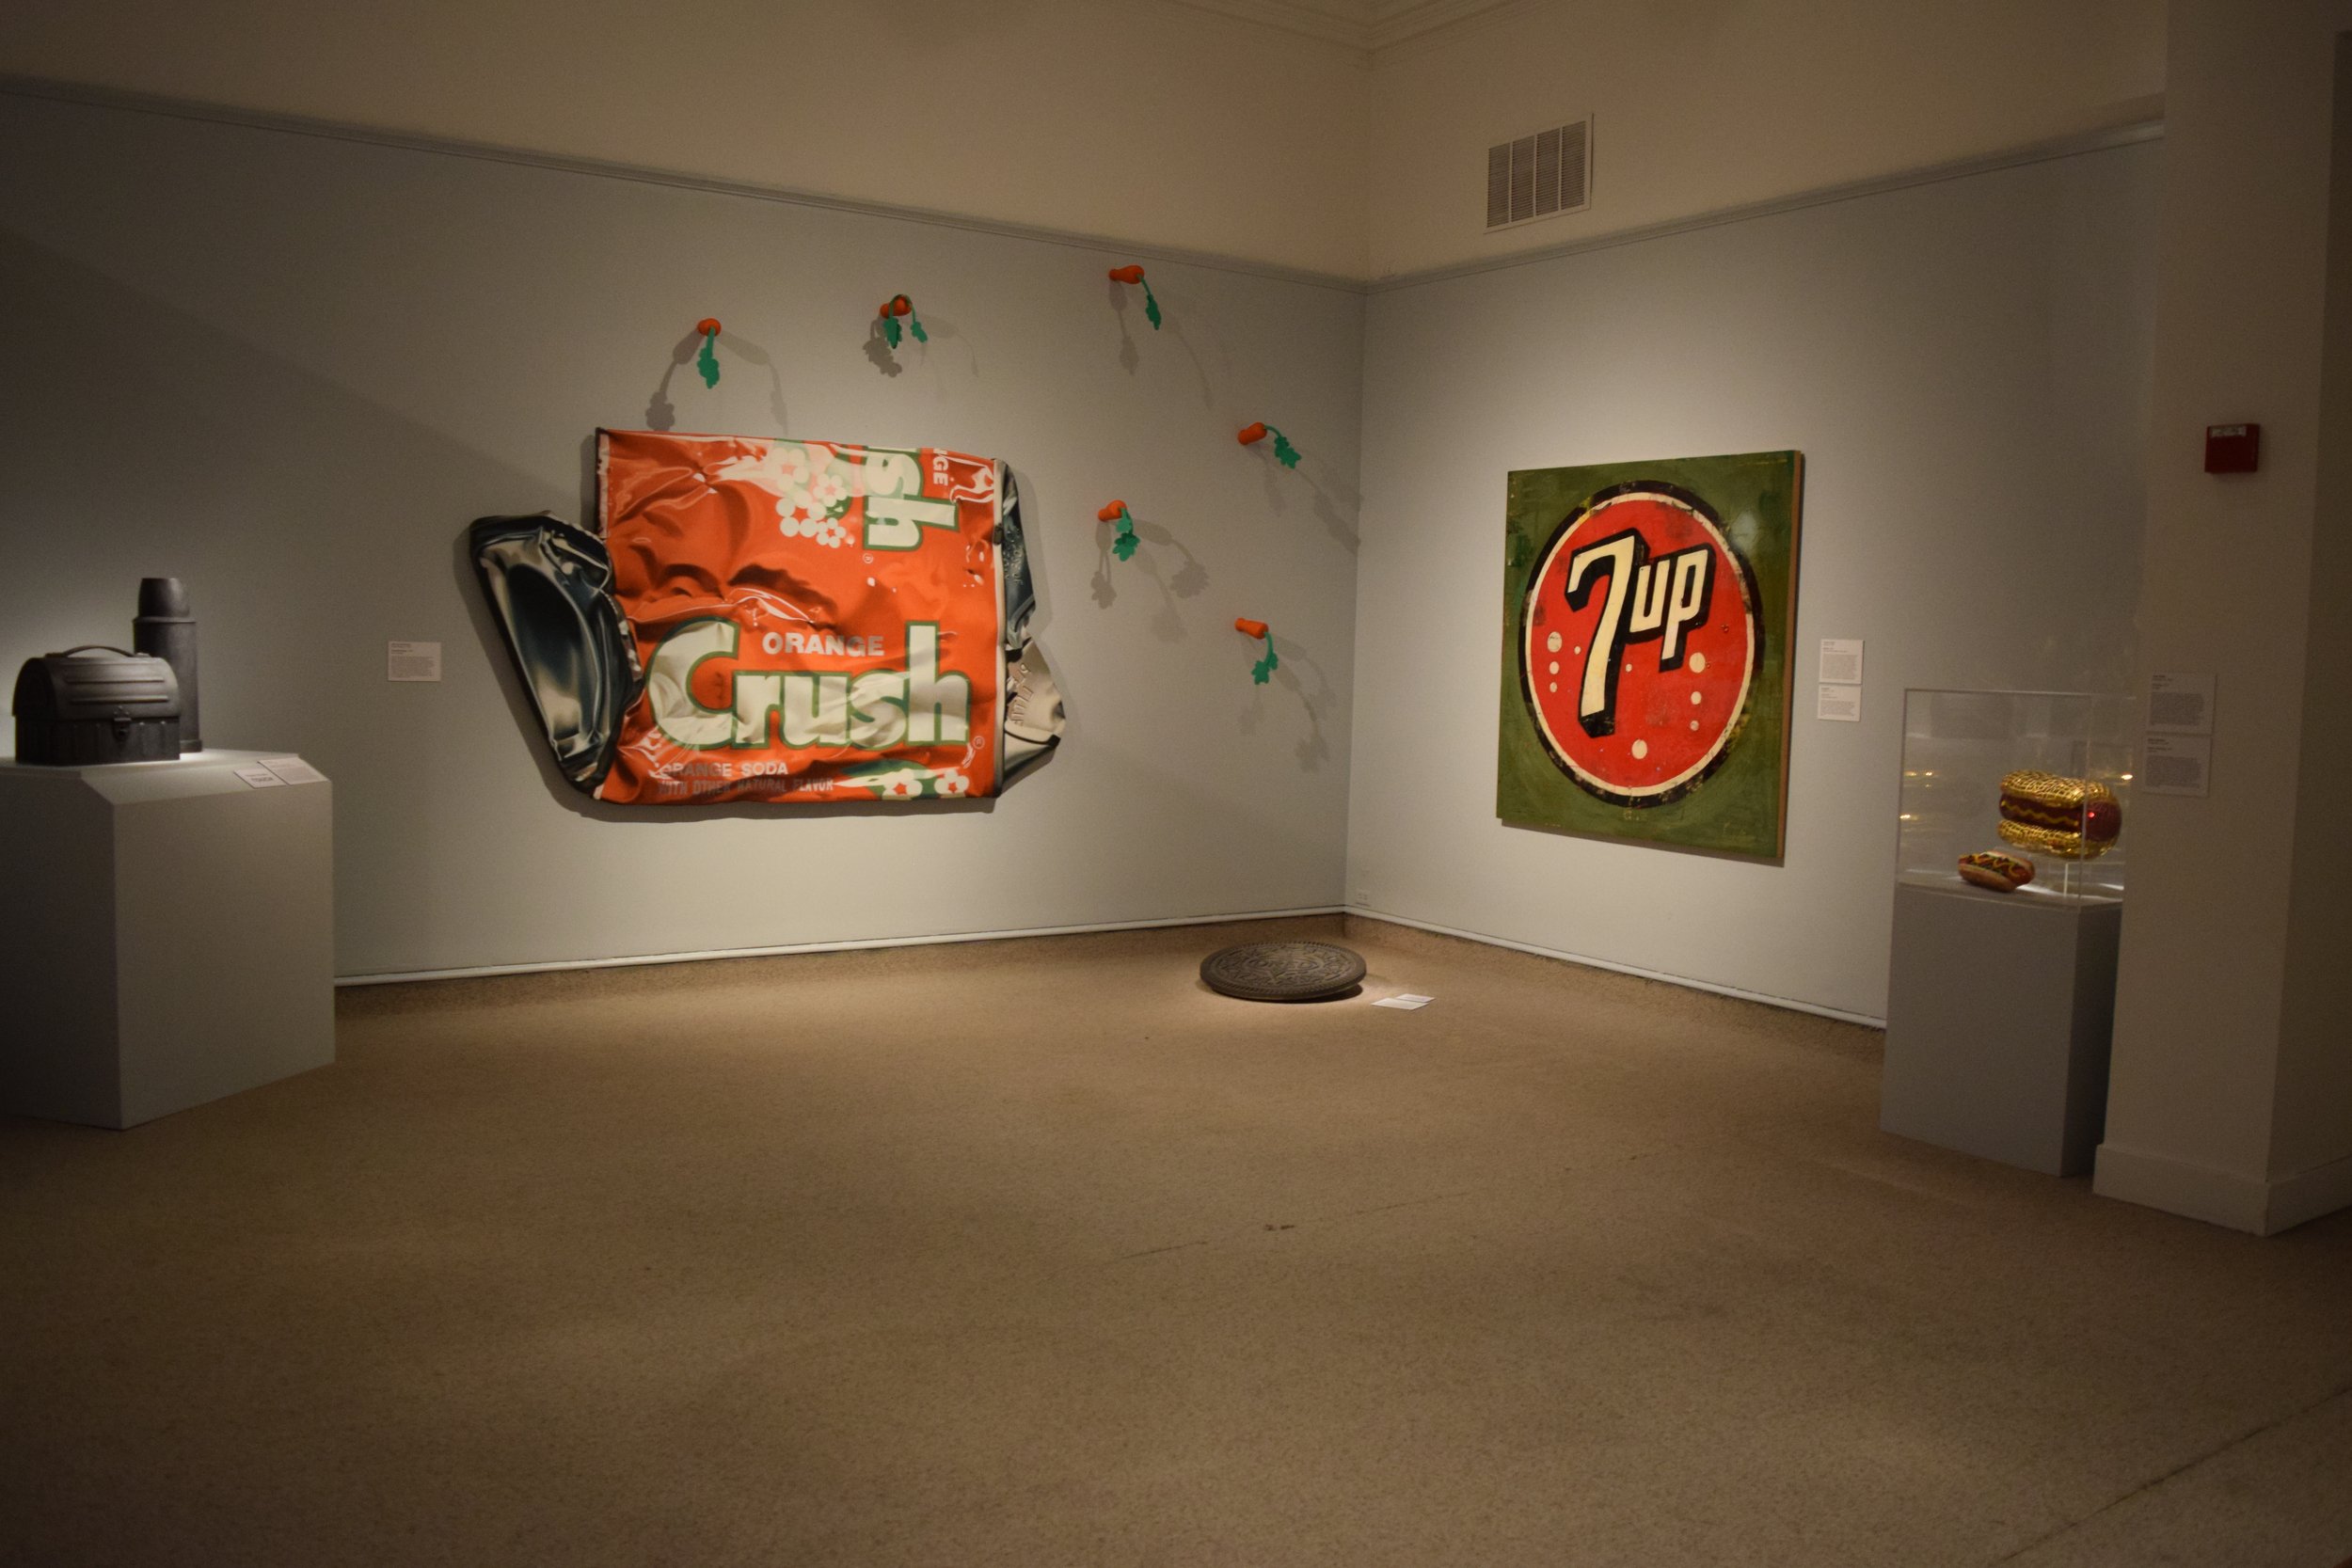  Daniel Oates,  Lunch Box and Thermos  (1992); José Luis Quiñones,  Crushed Orange  (1980); Vincent James,  Bullets  (2000); Andrew Lewicki,  Oreo Manhole Cover  (2010); Greg Miller,  7UP  (2005); Betty Spindler,  Pink’s Hot Dog  (2007); Jean Wells, 